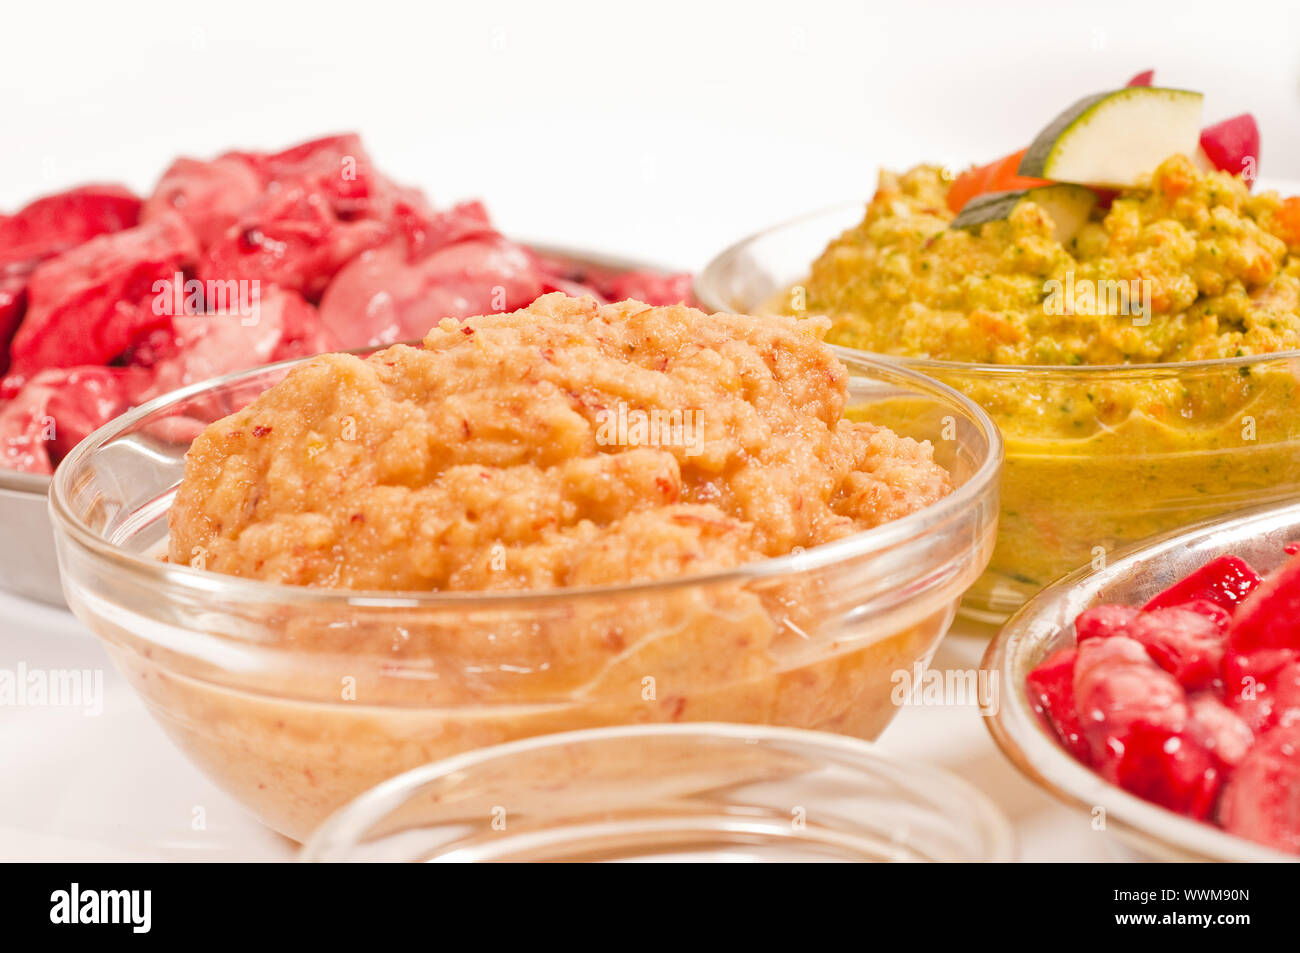 Barf: raw meat with vegetable and fruit portions, ready-prepared Stock Photo